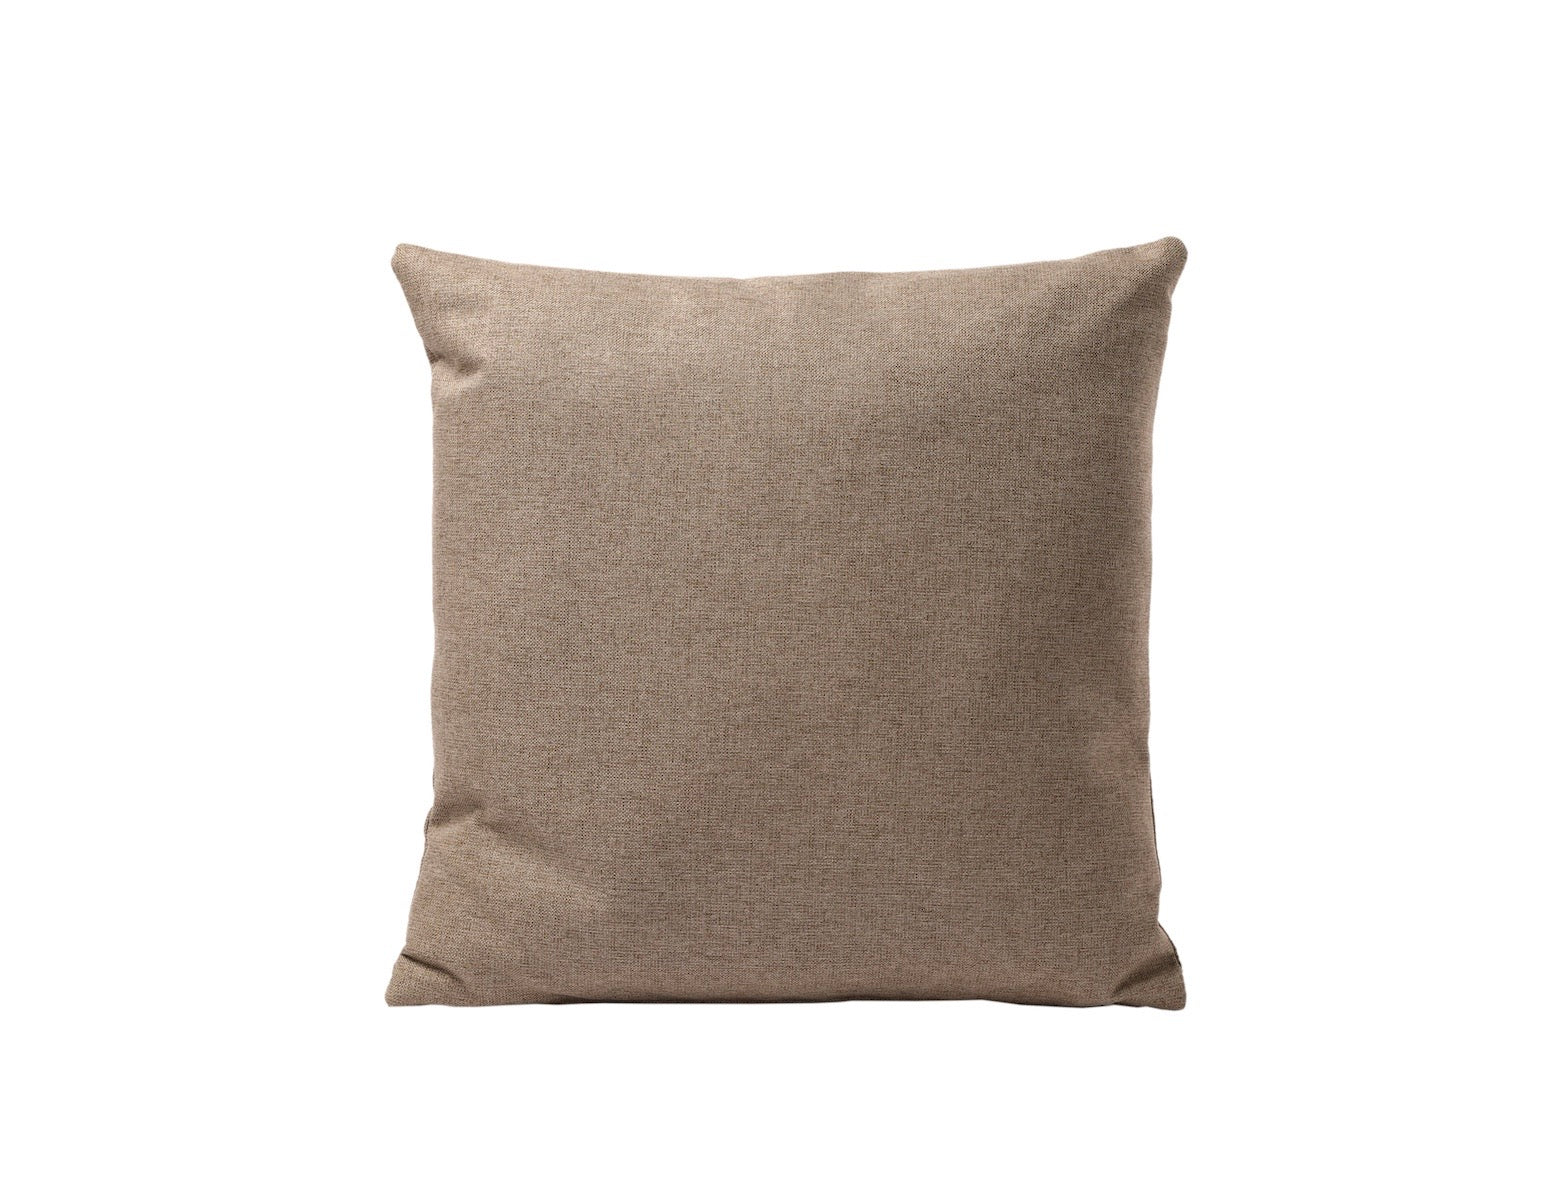 Knot Pillow - Cushions